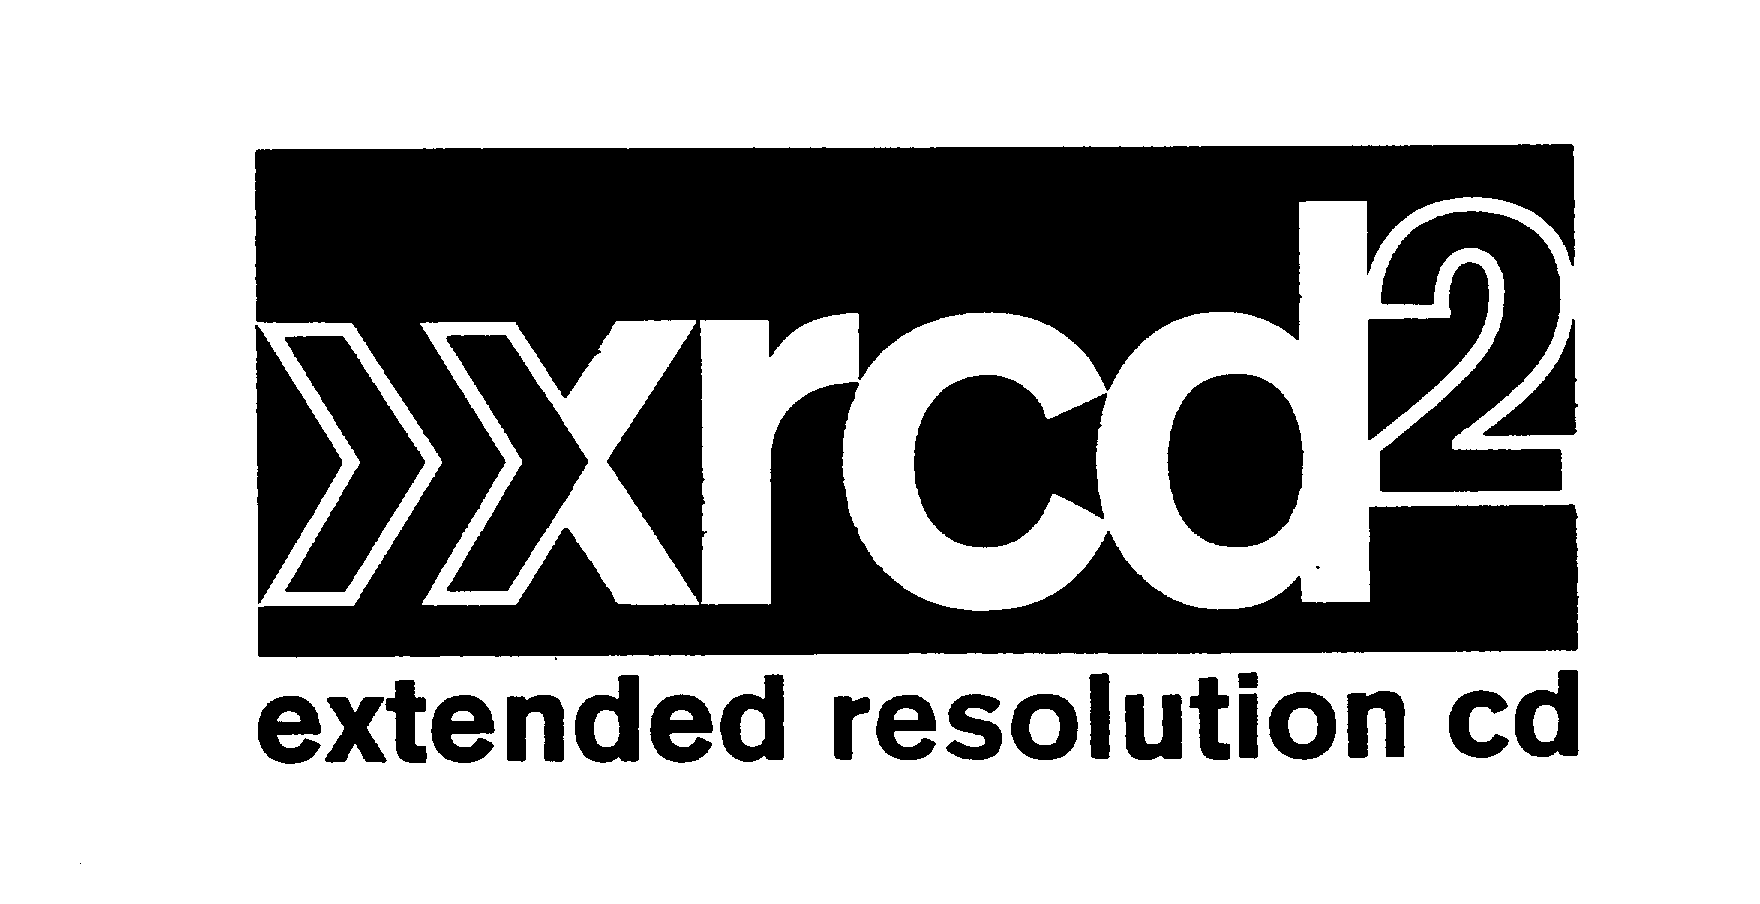  XRCD2 EXTENDED RESOLUTION CD